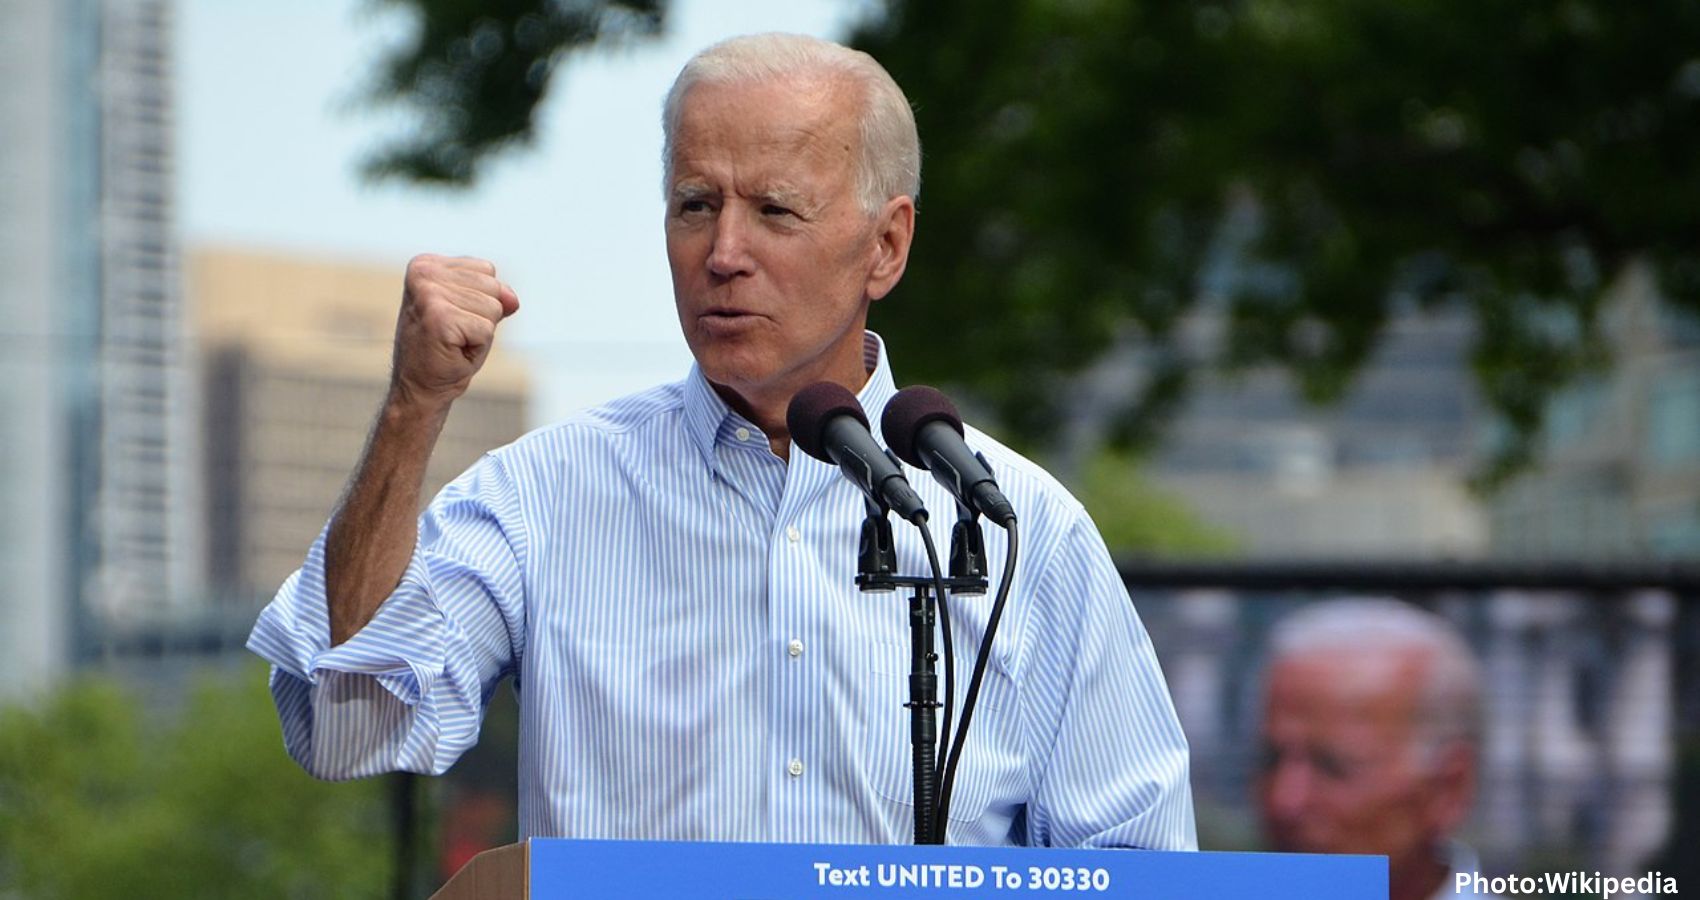 Biden Adopts Aggressive Strategy to Counter Calls for Withdrawal and Solidify Position as Democratic Nominee